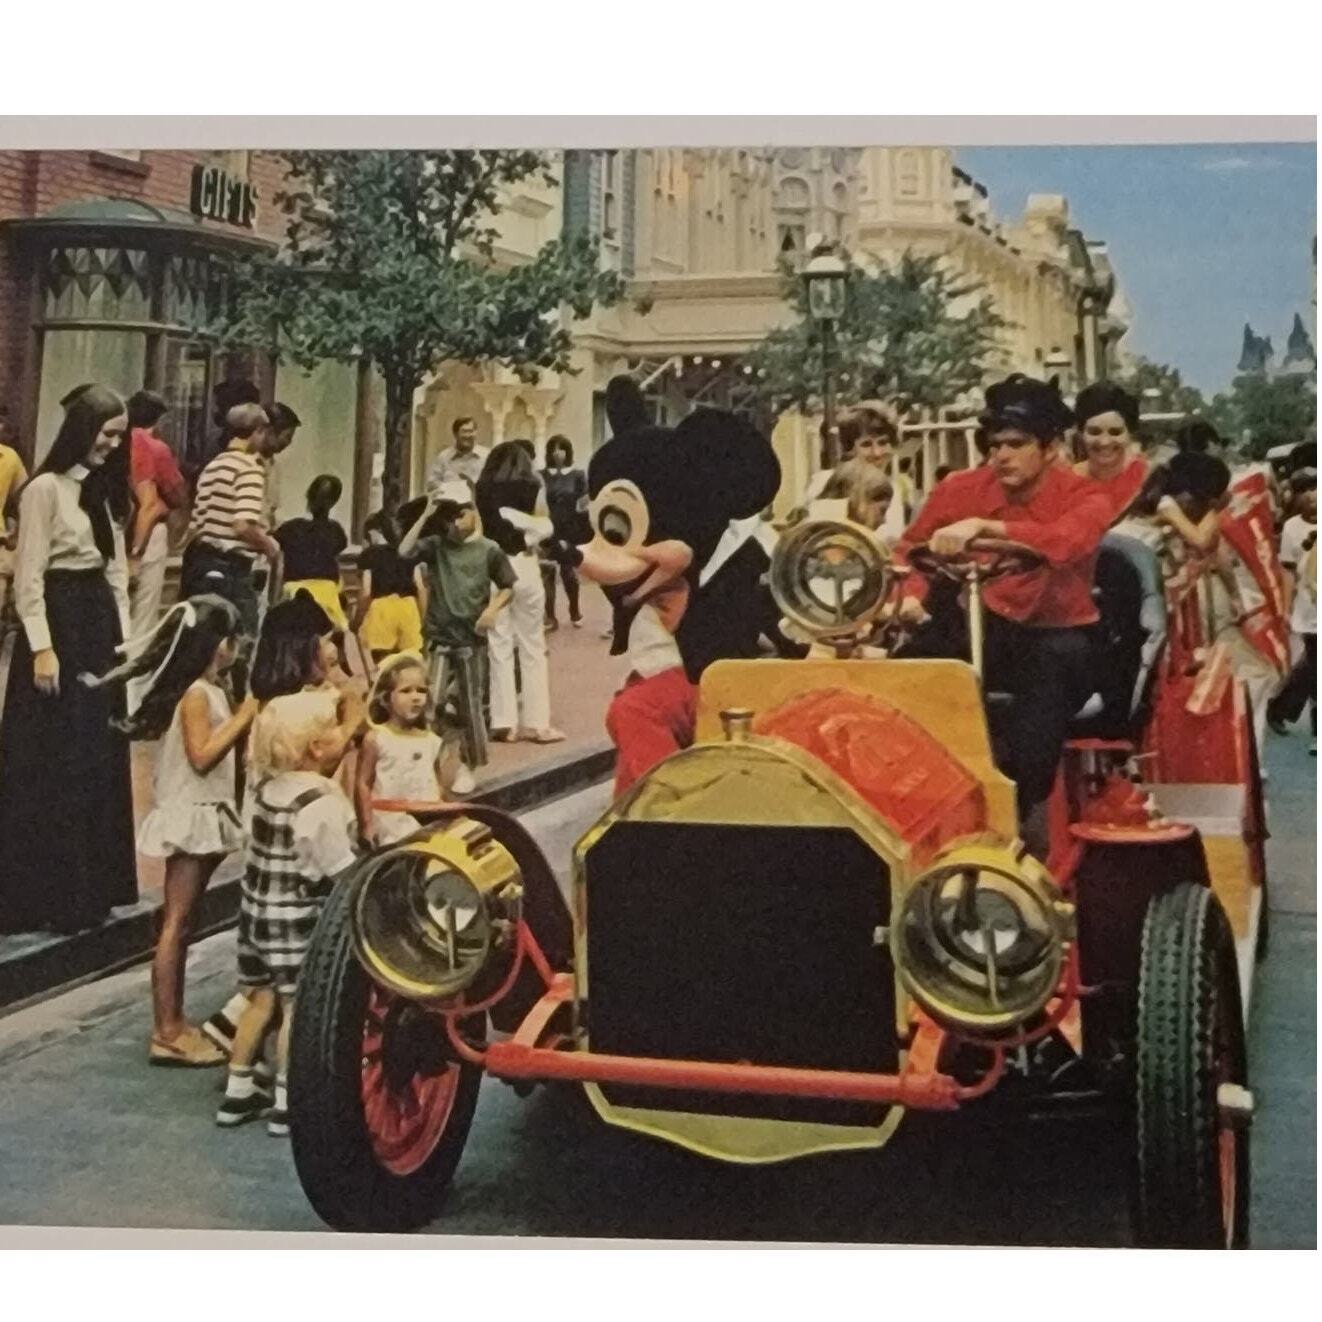  Mickey Mouse Riding Down Main Street Vintage Postcard. 